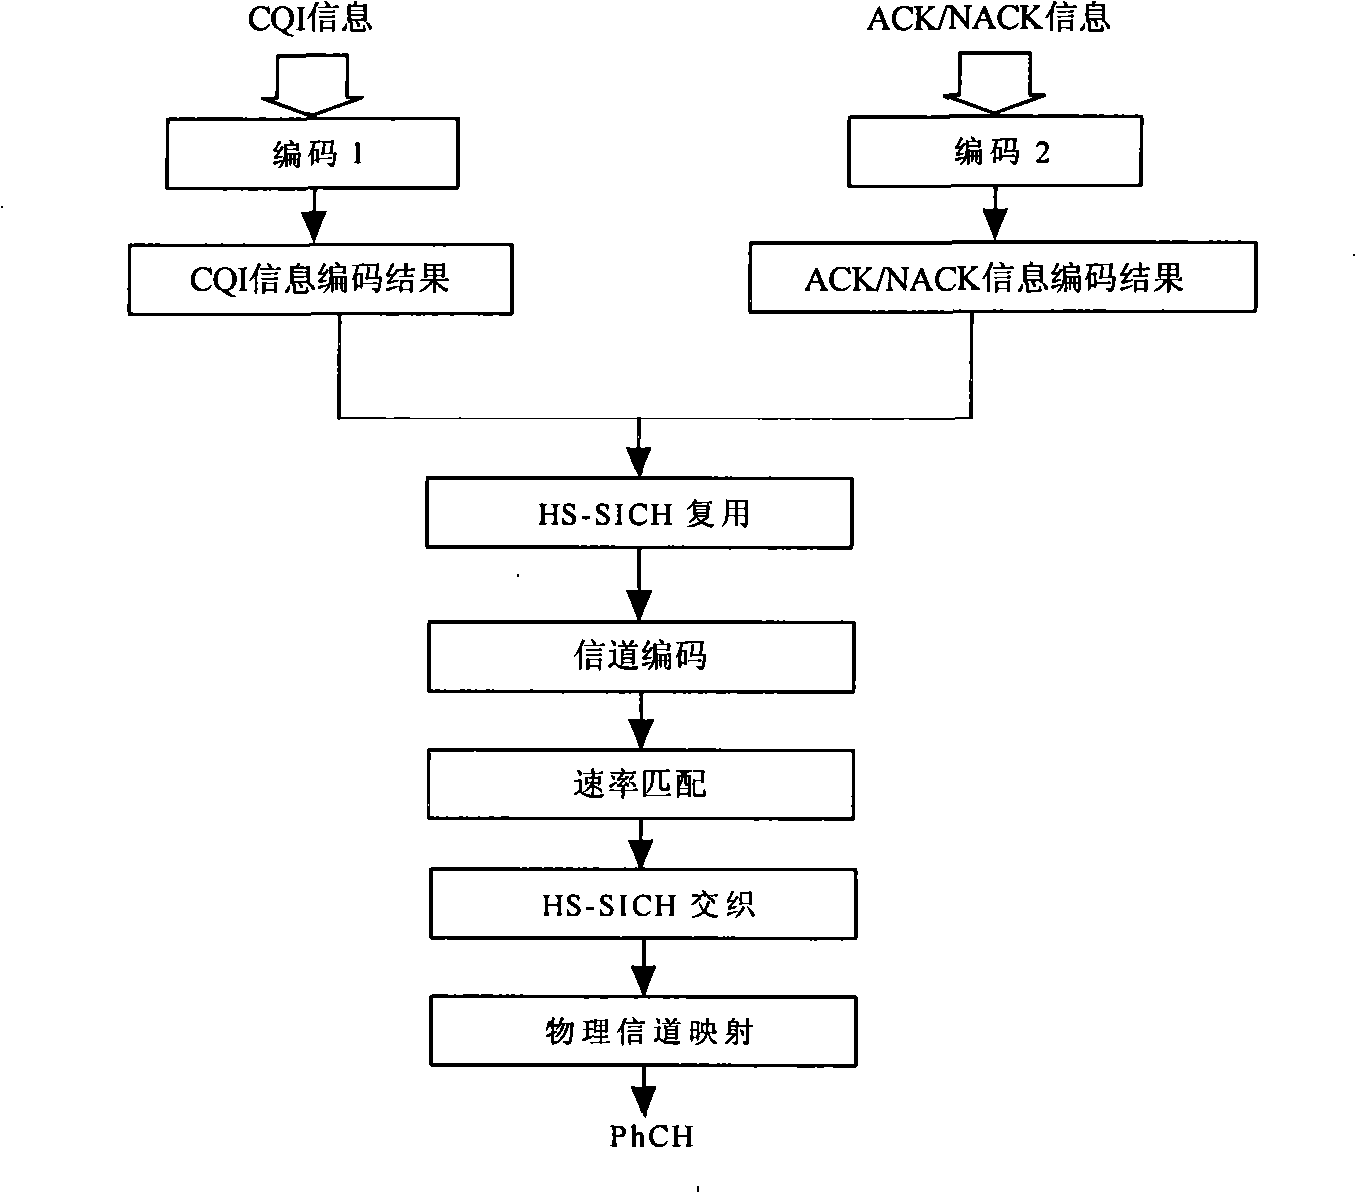 HS-SICH information bearing and encoding method